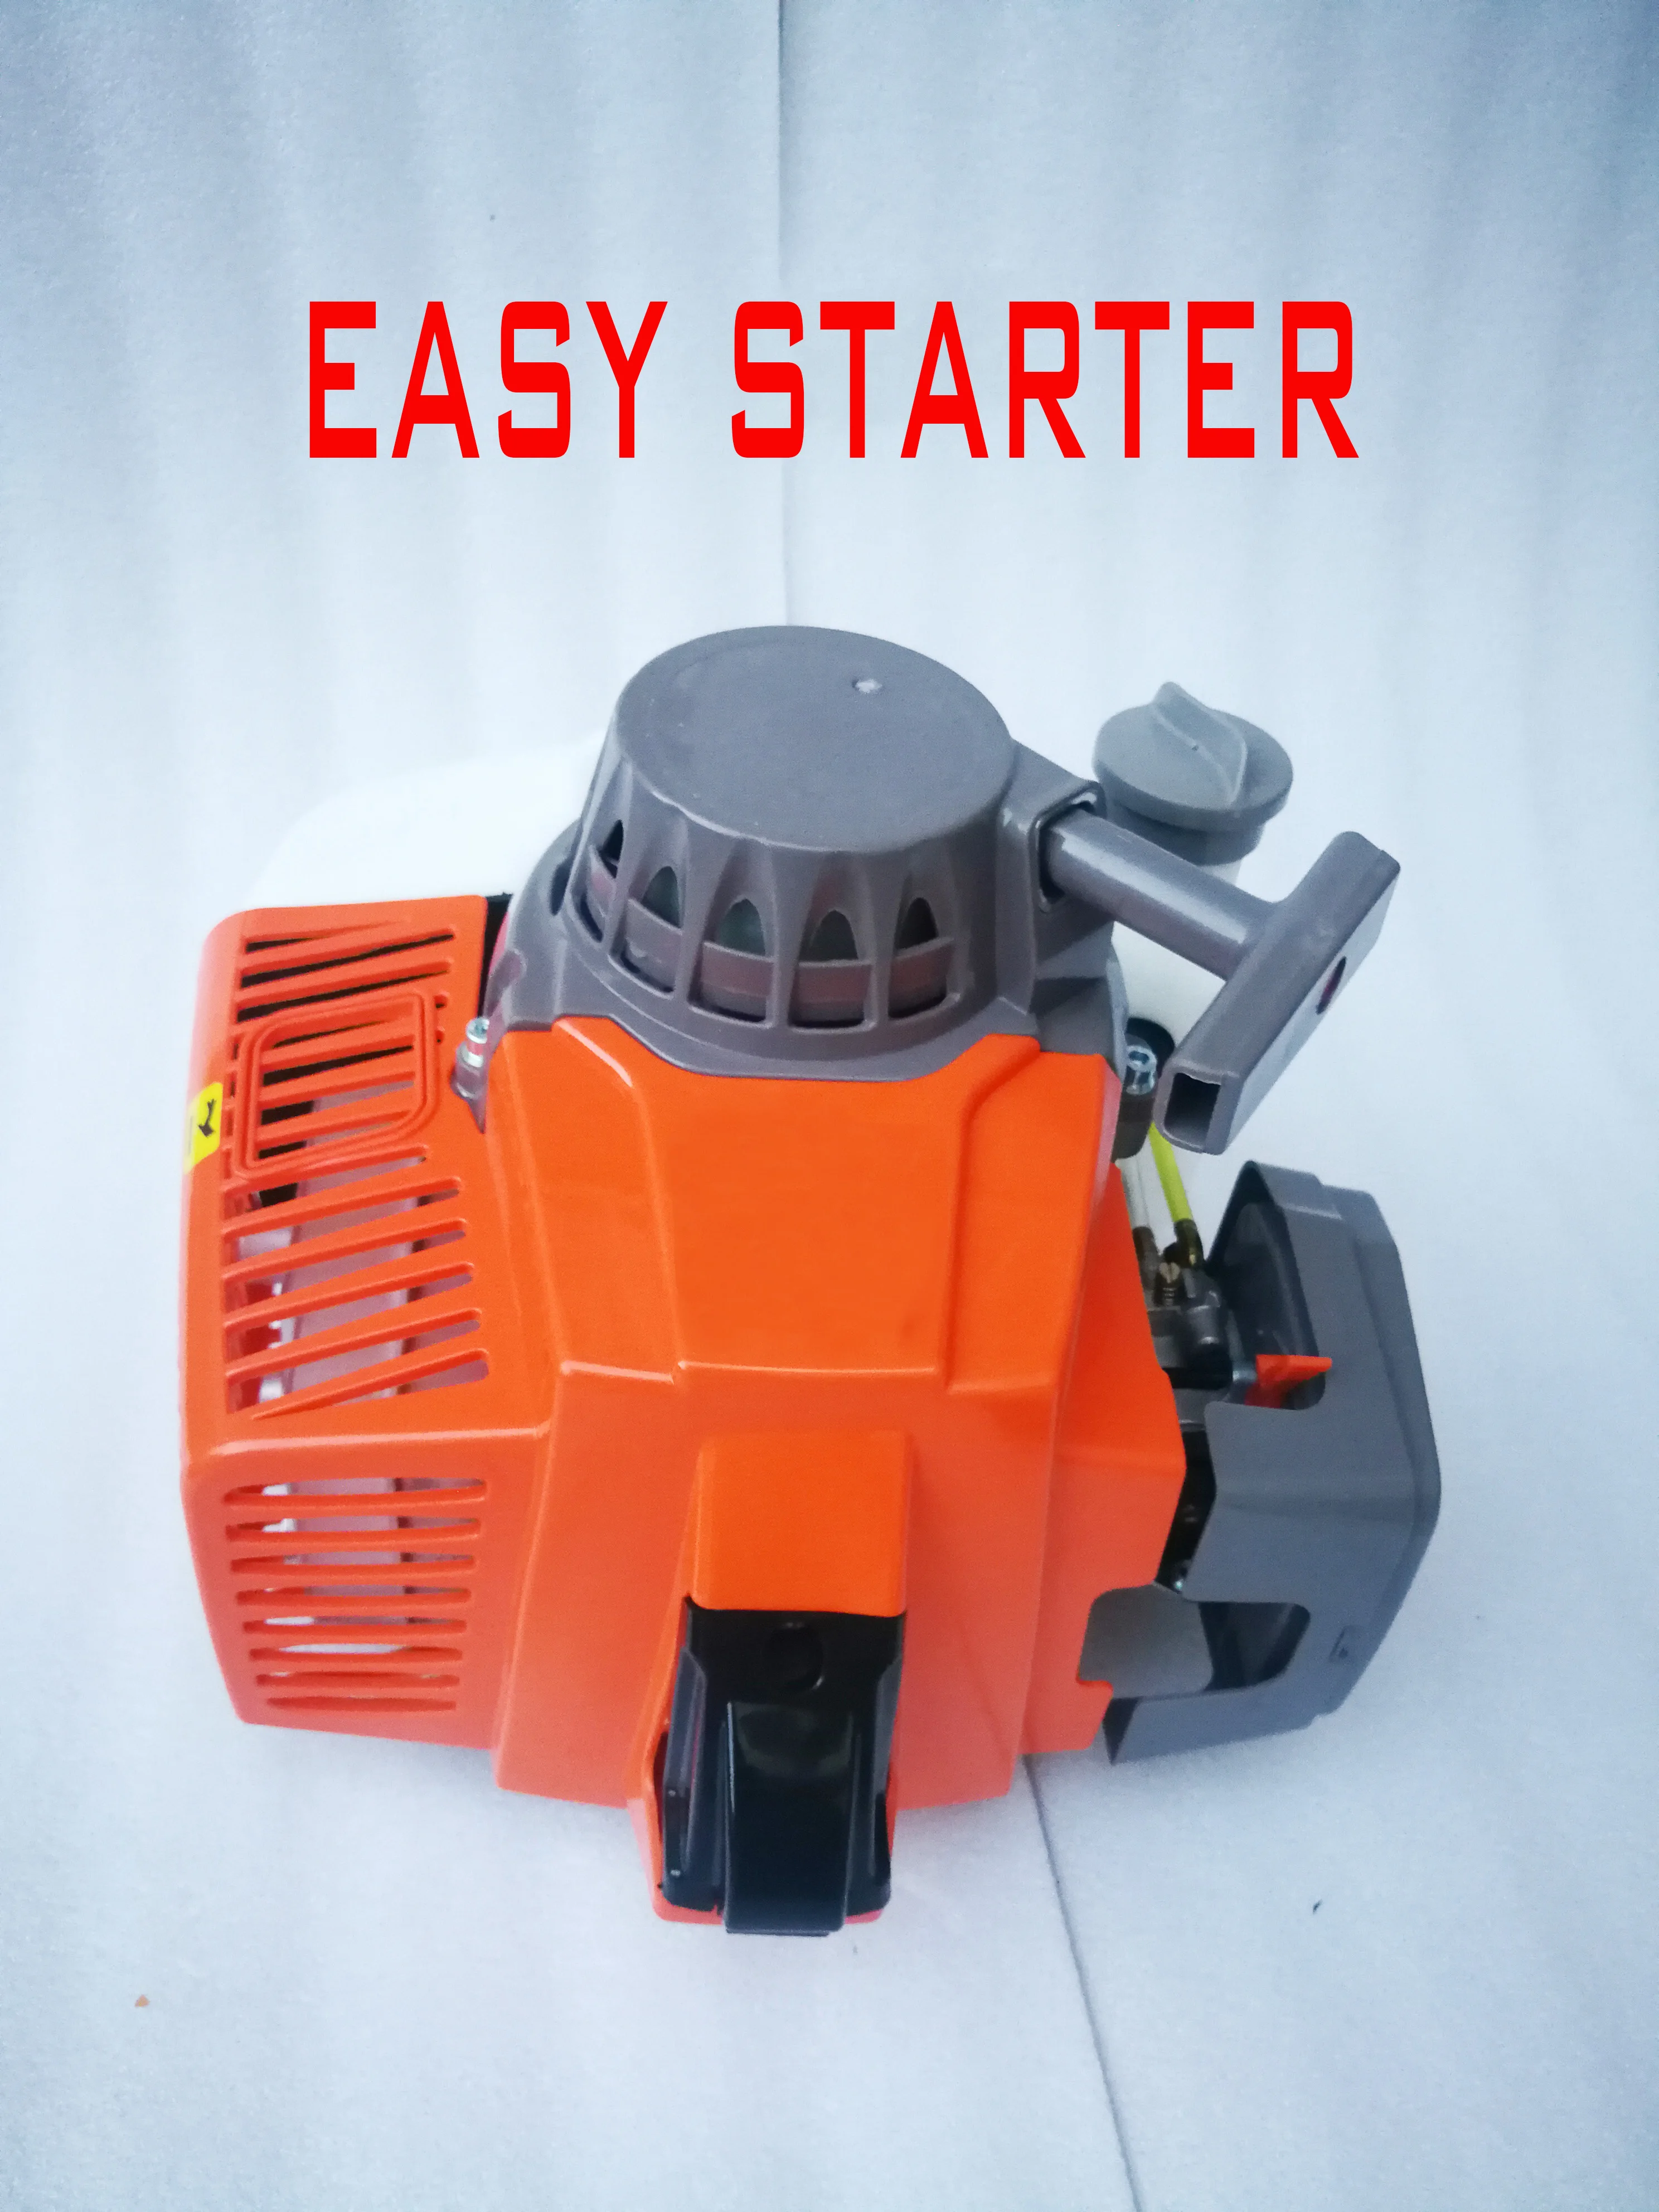 80CC Engine 2T Motor Petrol Brush Cutter Auger Scooter Motorbike Outboard Hugh Power Not 71cc 63cc Goped  53mm Cylinder Piston enlarge